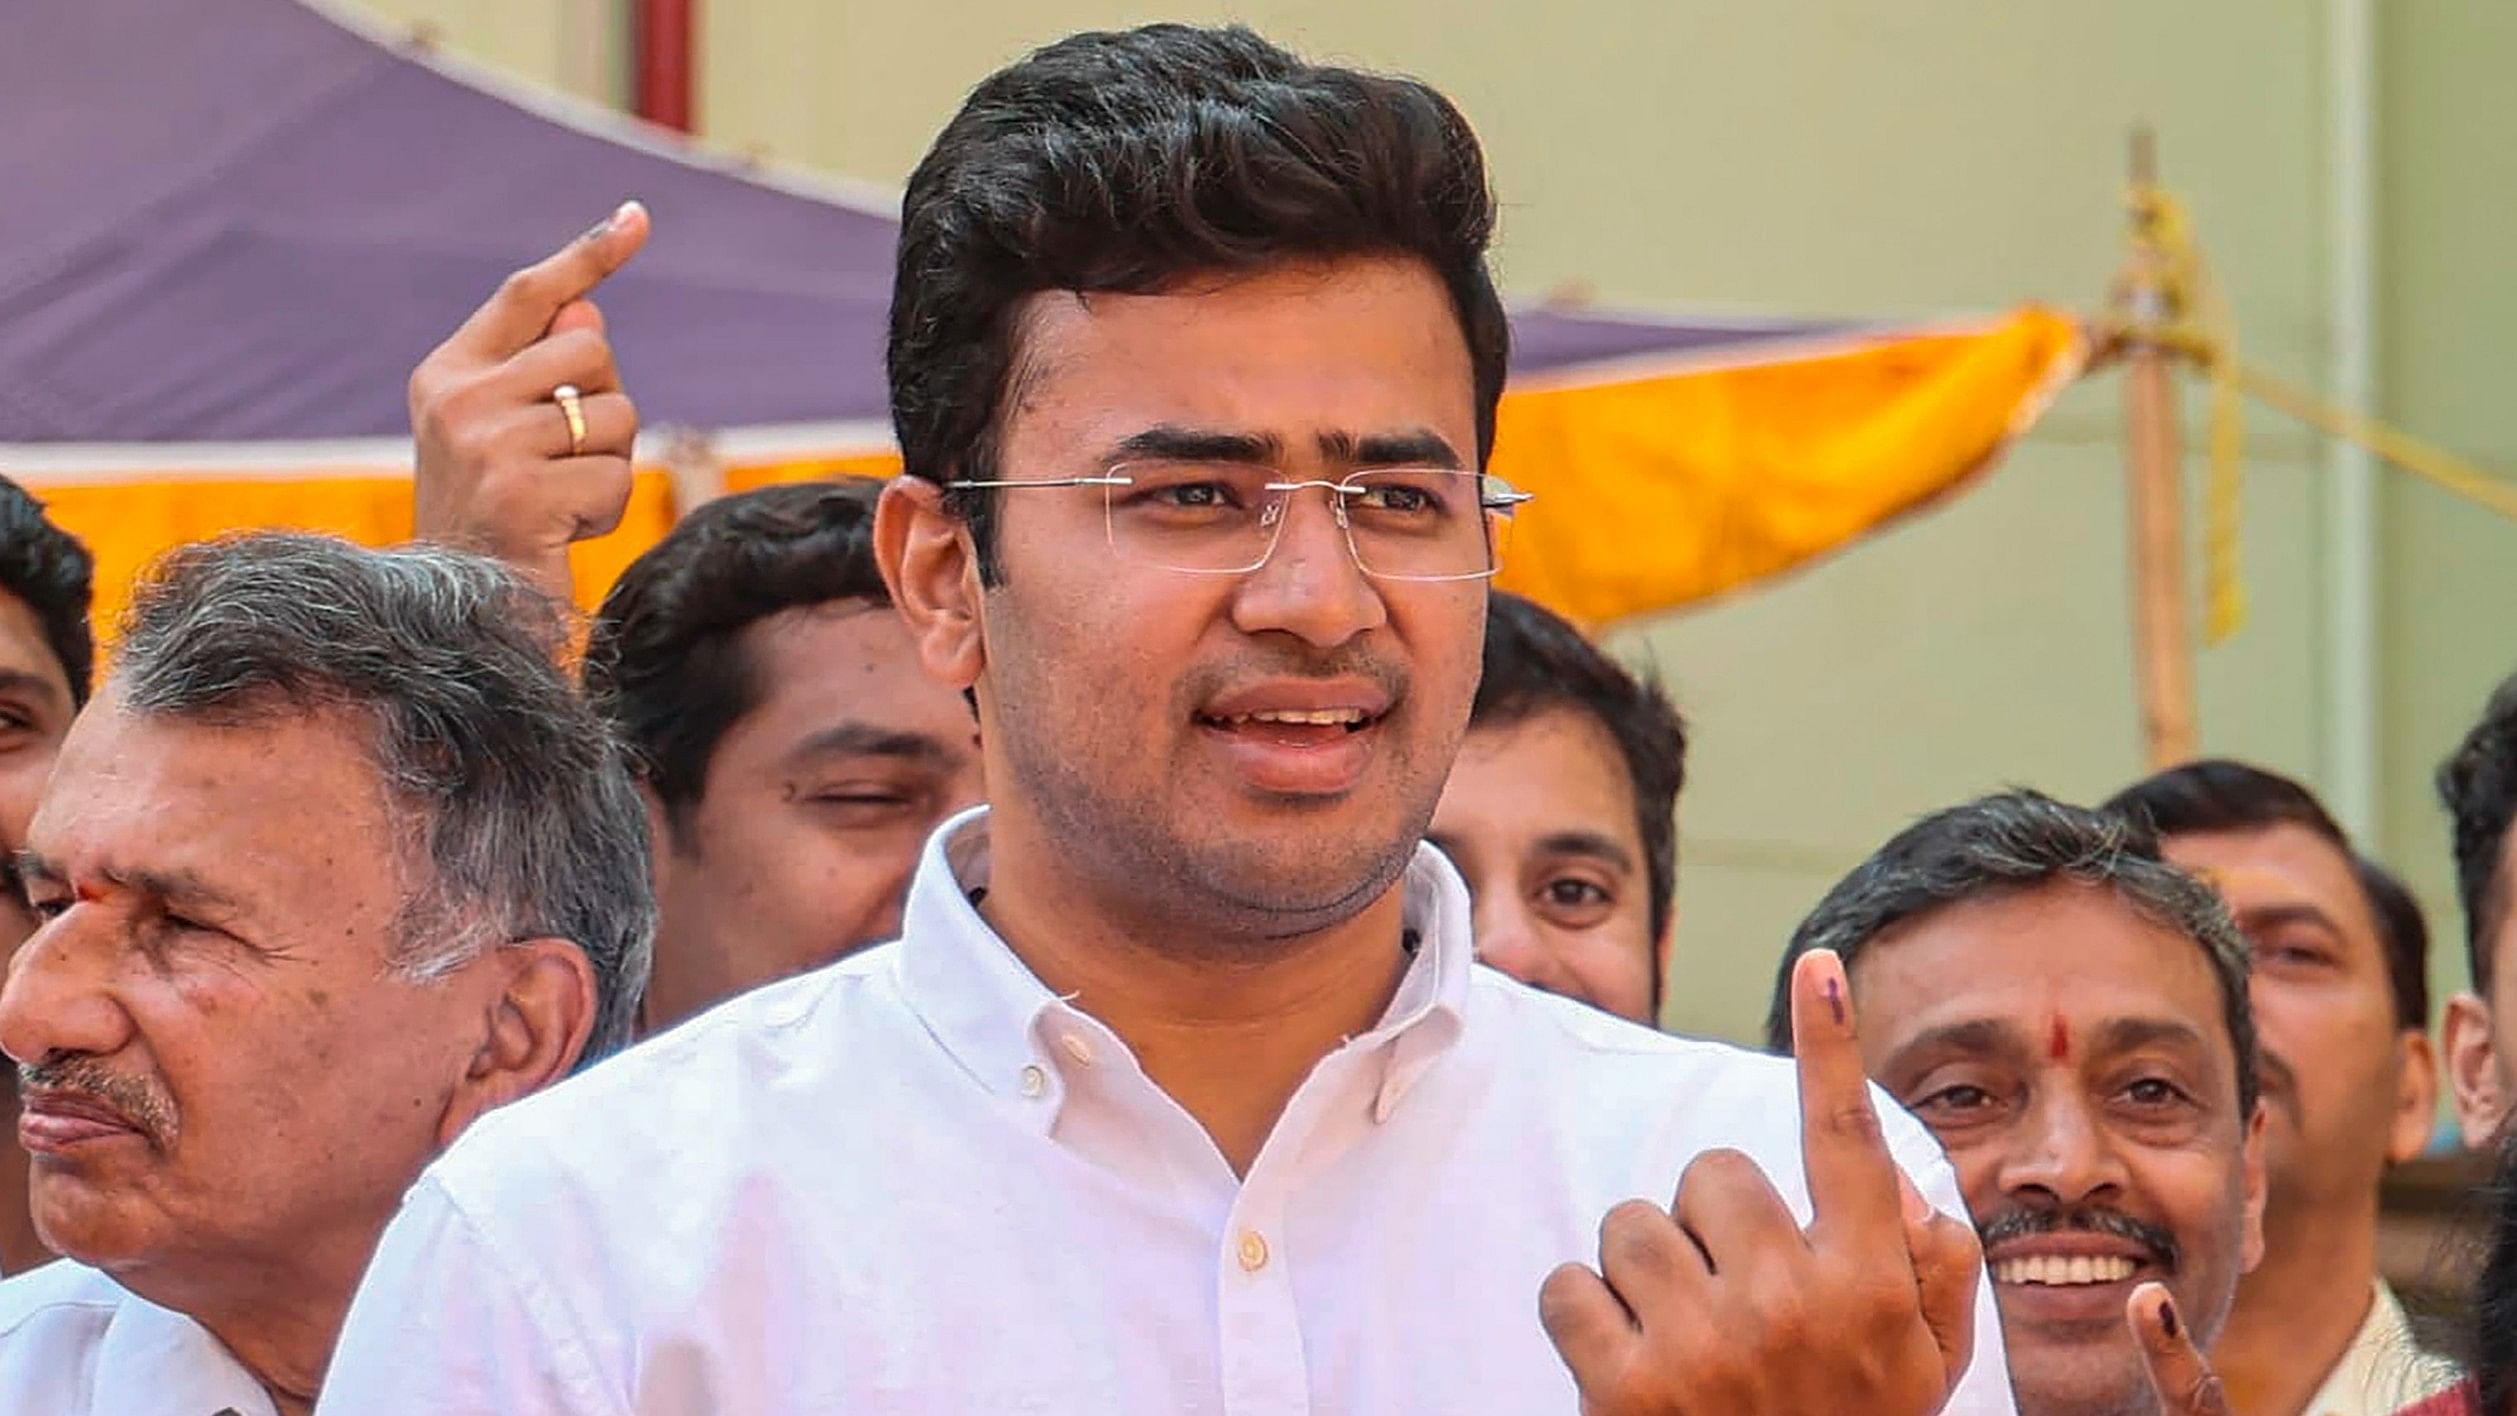 <div class="paragraphs"><p>Bengaluru South constituency BJP candidate Tejasvi Surya shows his finger marked with indelible ink after casting his vote for the 2nd phase of Lok Sabha elections, in Bengaluru, on Friday.</p></div>